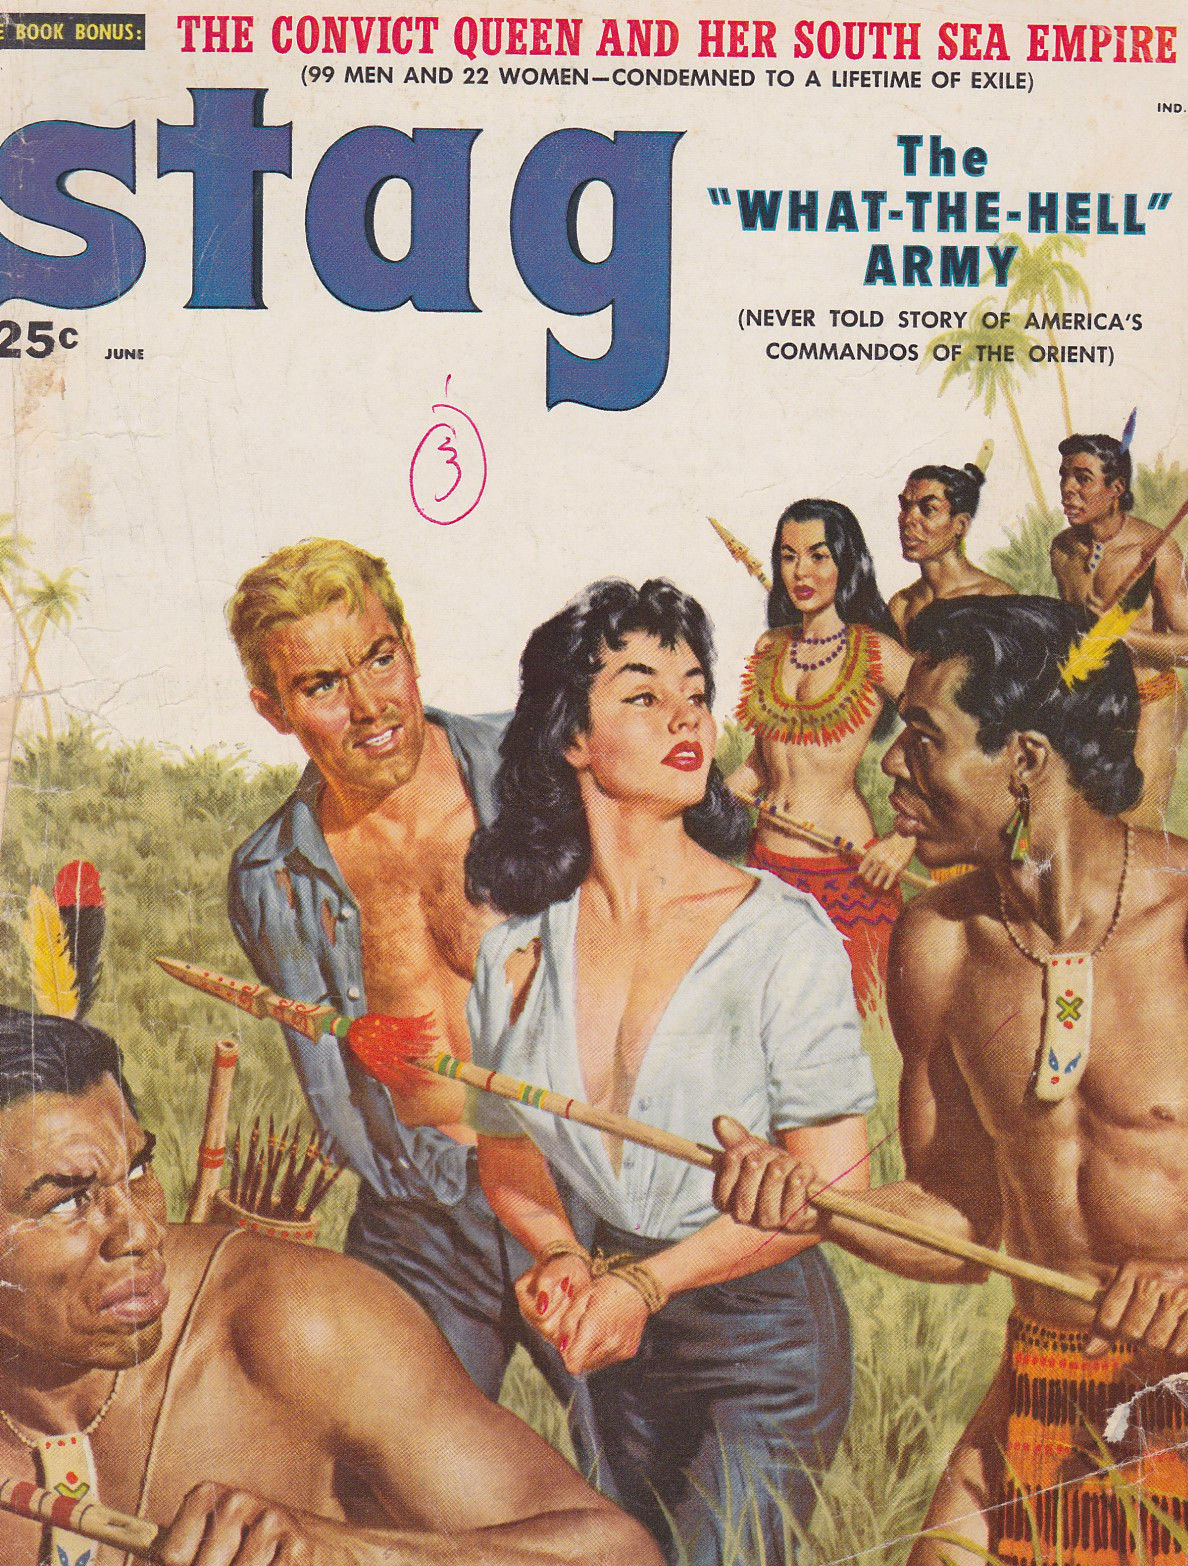 Stag June 1958 magazine back issue Stag magizine back copy Stag June 1958 Magazine for Men Adult Back Issue Published by Leeds Publishing Corp. The Convict Queen And Her South Sea Empire.